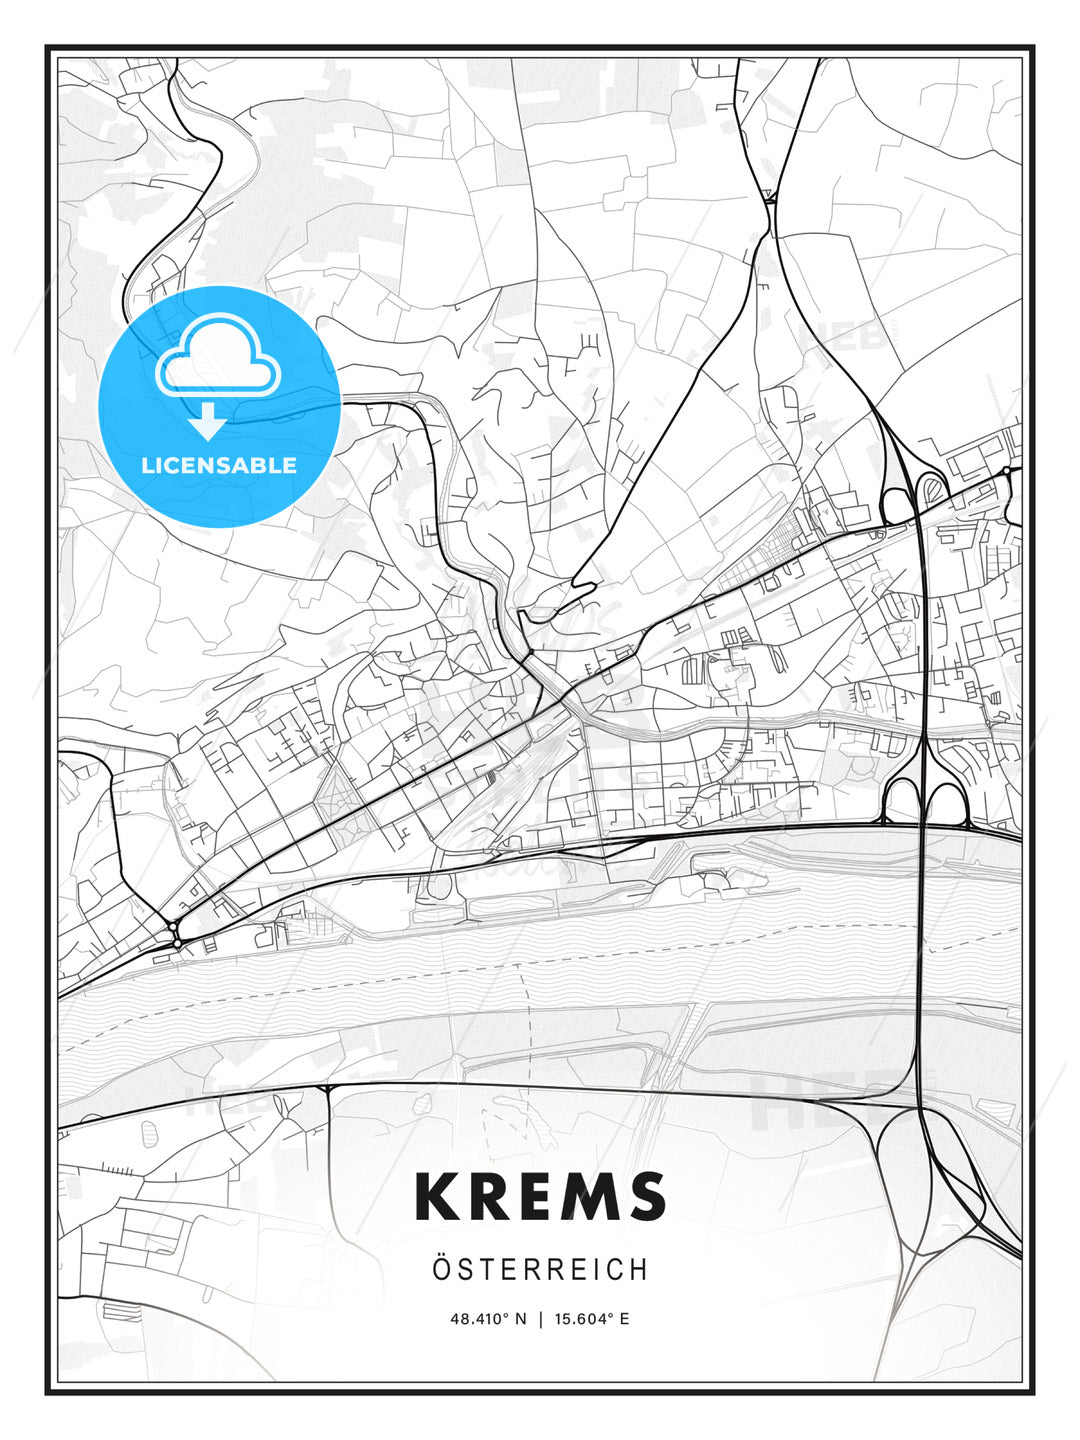 Krems, Austria, Modern Print Template in Various Formats - HEBSTREITS Sketches